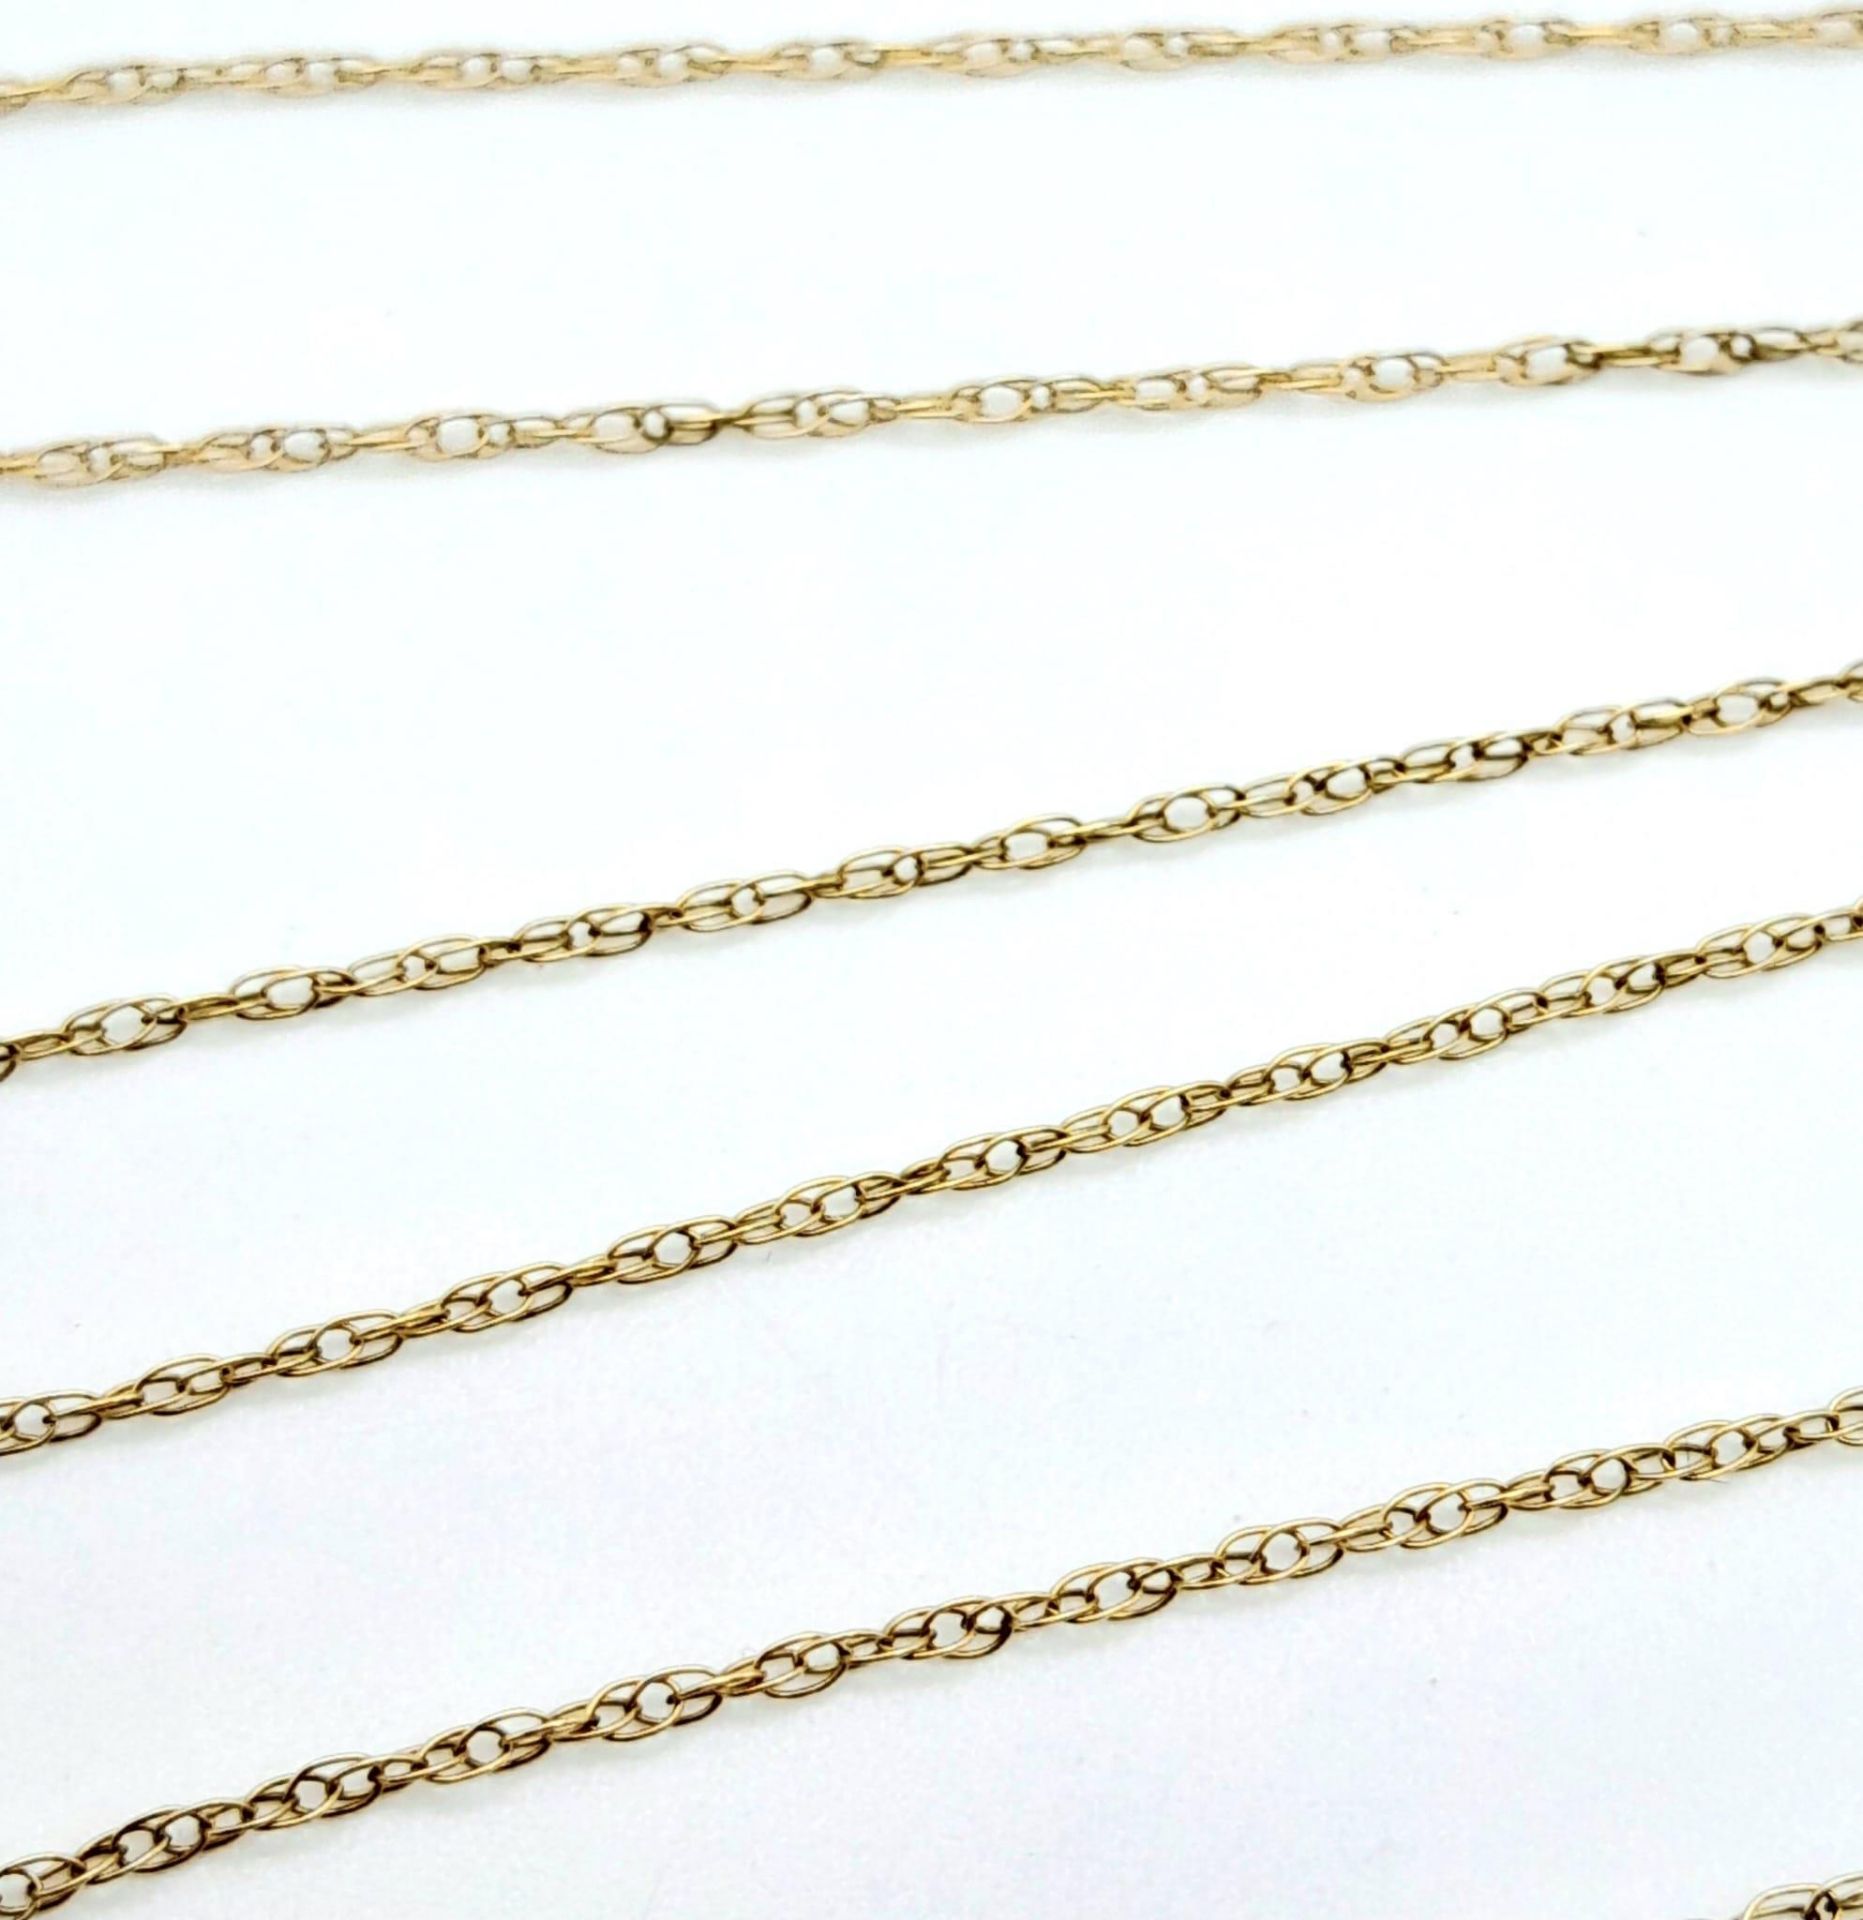 A 9K Yellow Gold Disappearing Necklace. 48cm length. 0.75g weight. - Image 4 of 5